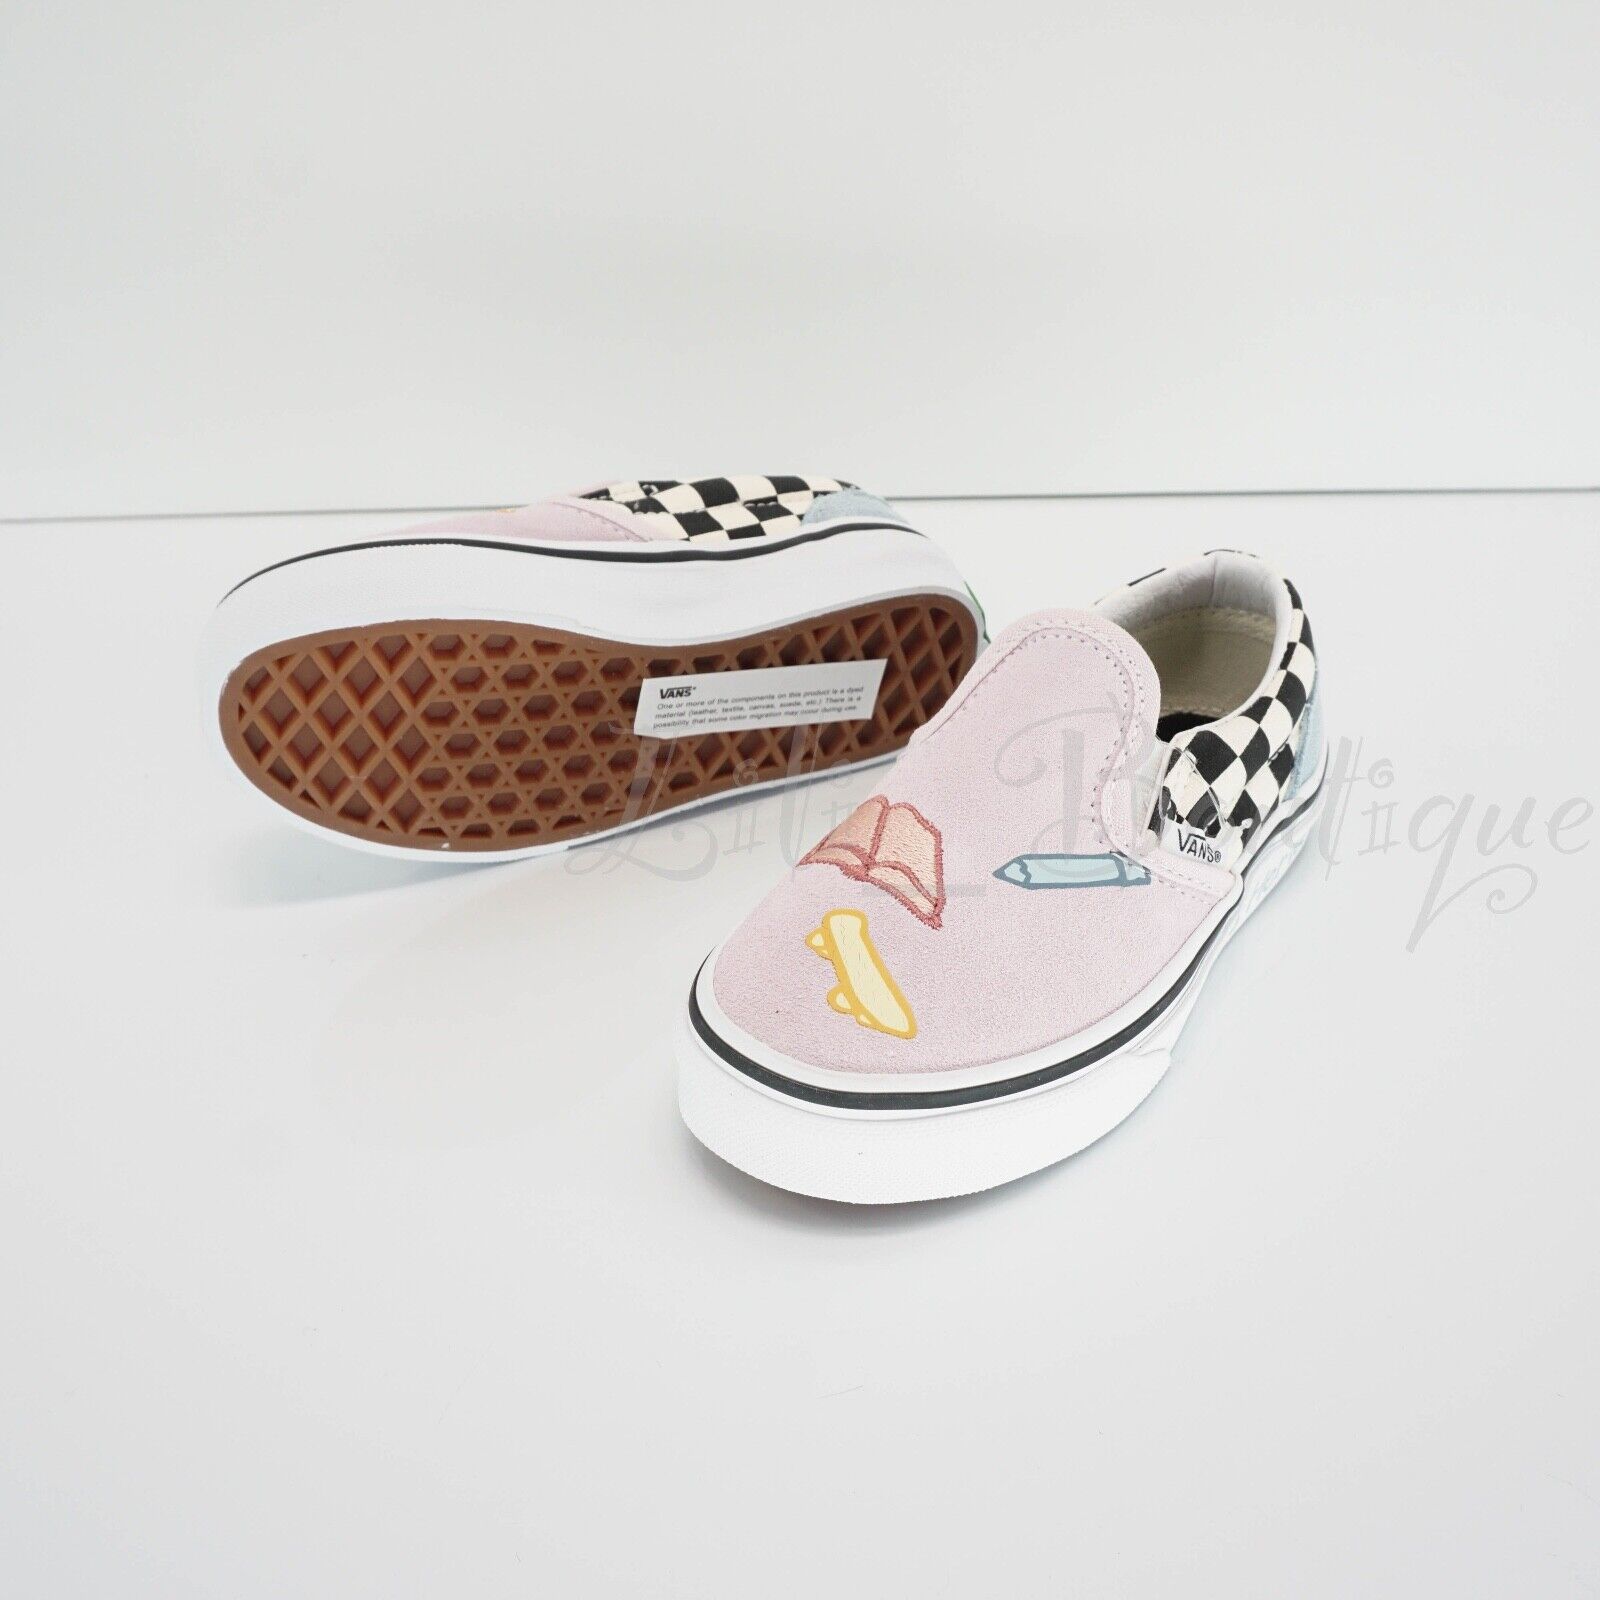 Primary image for No Box Vans Kids Classic Slip-On Shoes Skateistan Suede Checkerboard Pink 10.5K